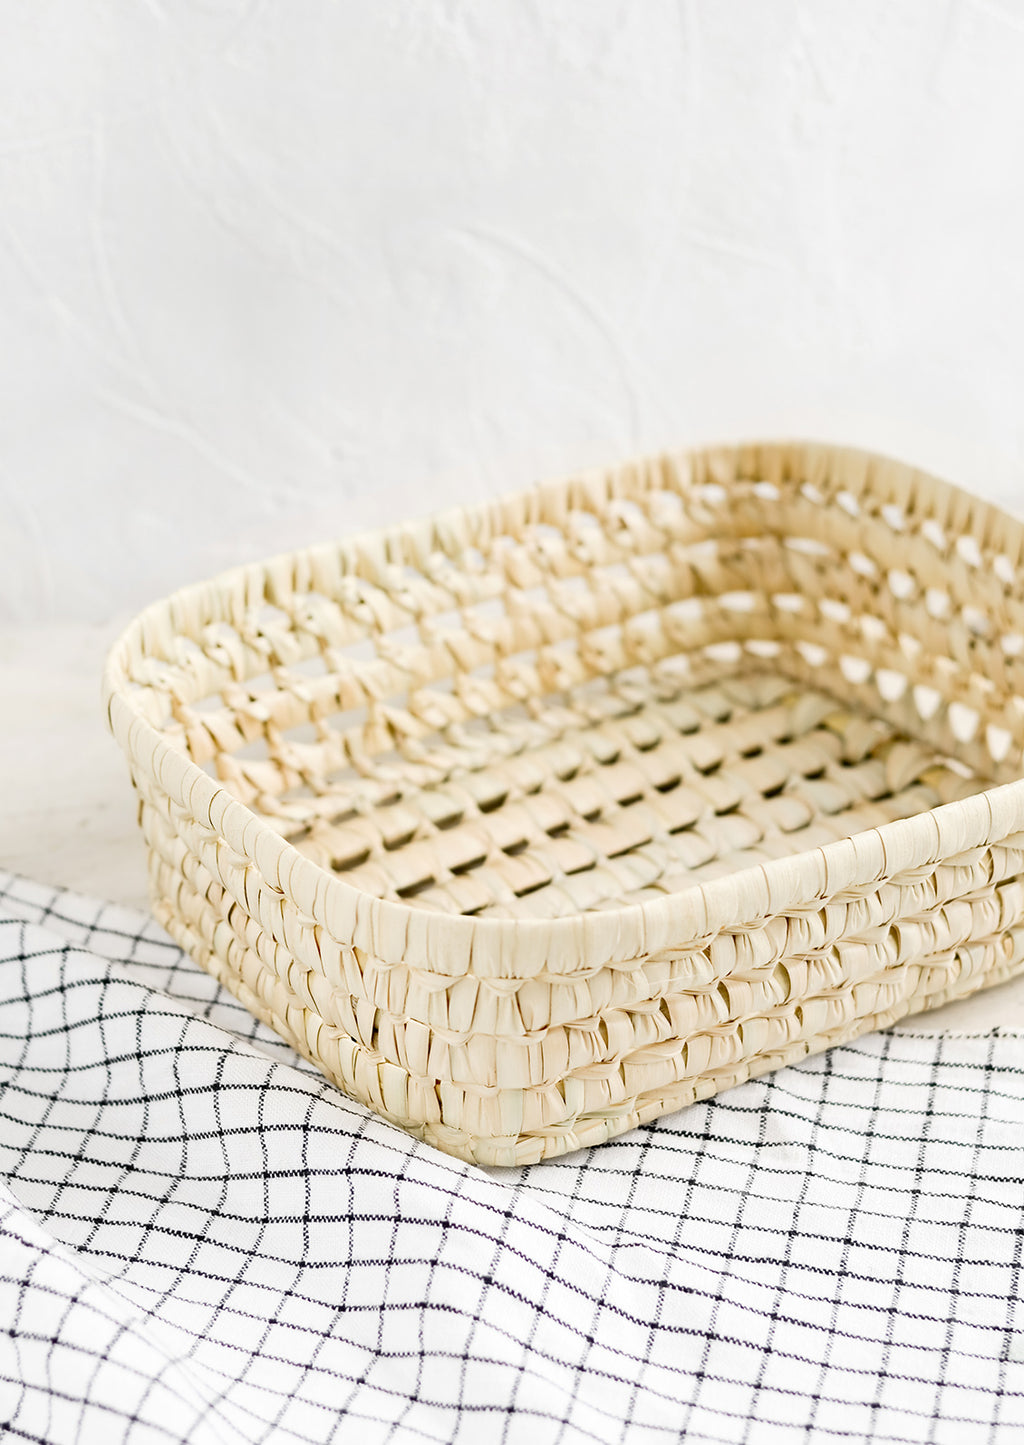 Large: A shallow storage basket made from dried palm leaf.